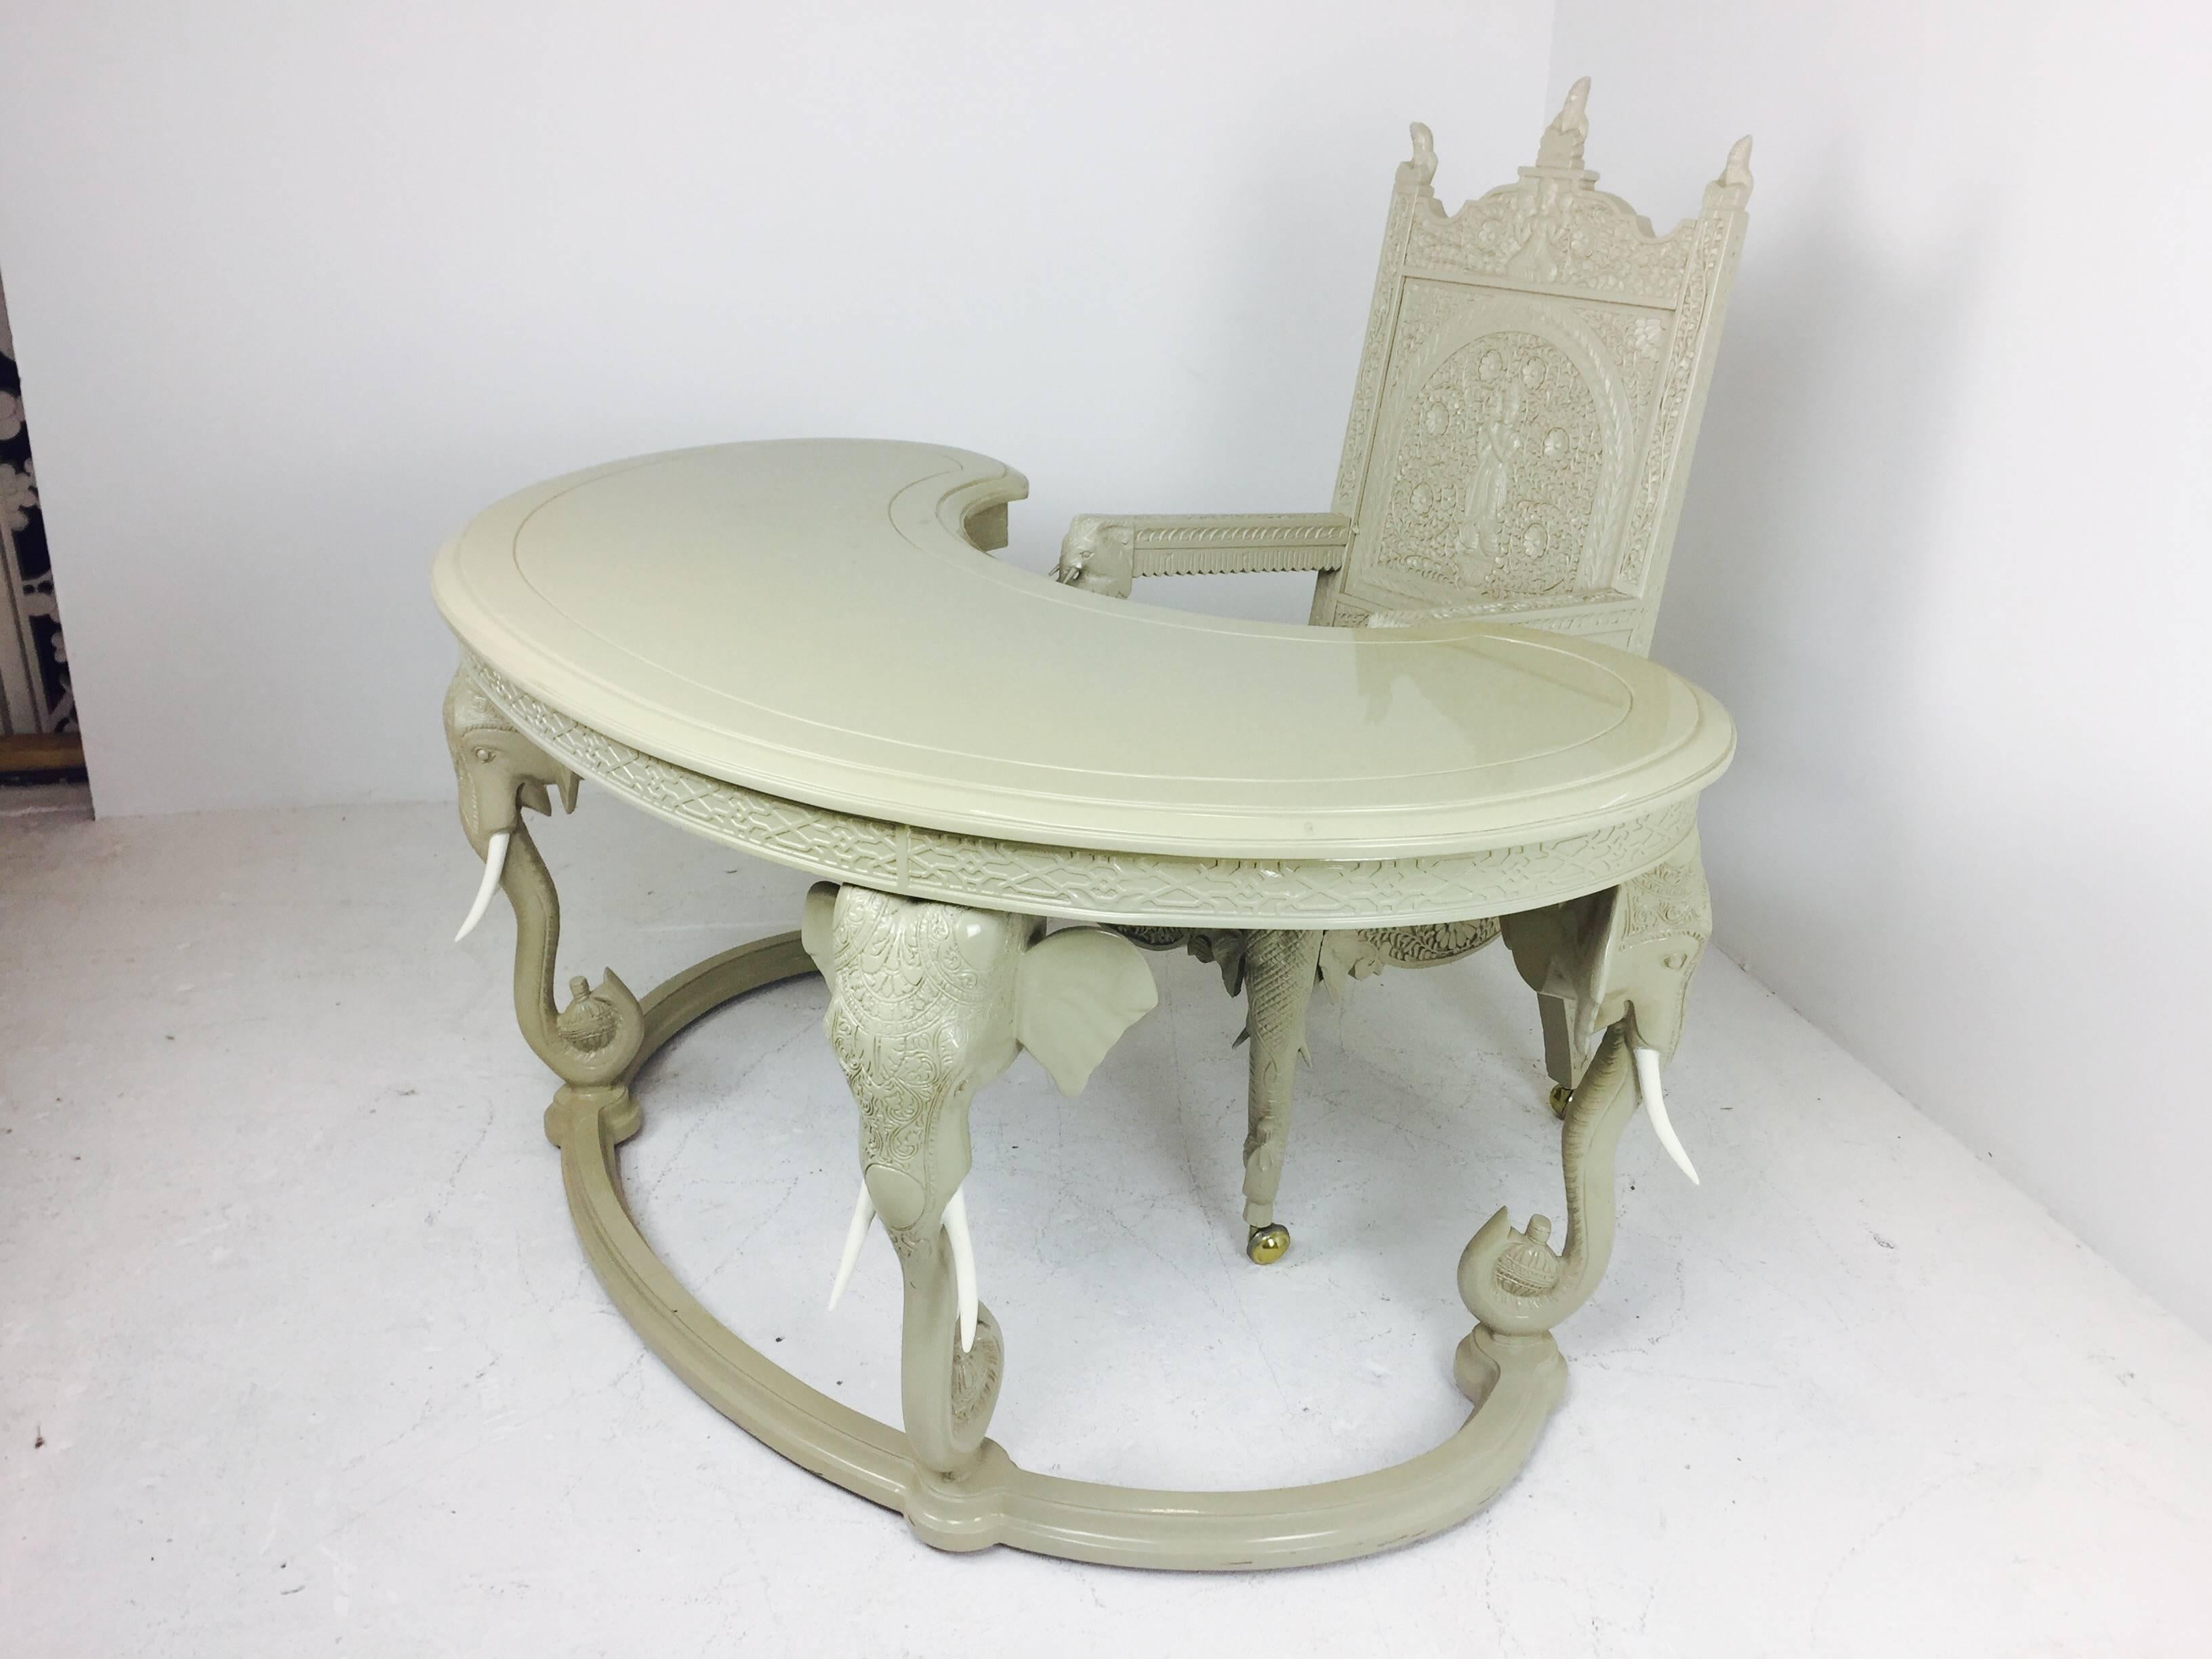 Hollywood Regency lacquered elephant desk and chair. The desk and chair are lacquered in similar soft taupe colors. Refinishing is recommended.

Dimensions: 60